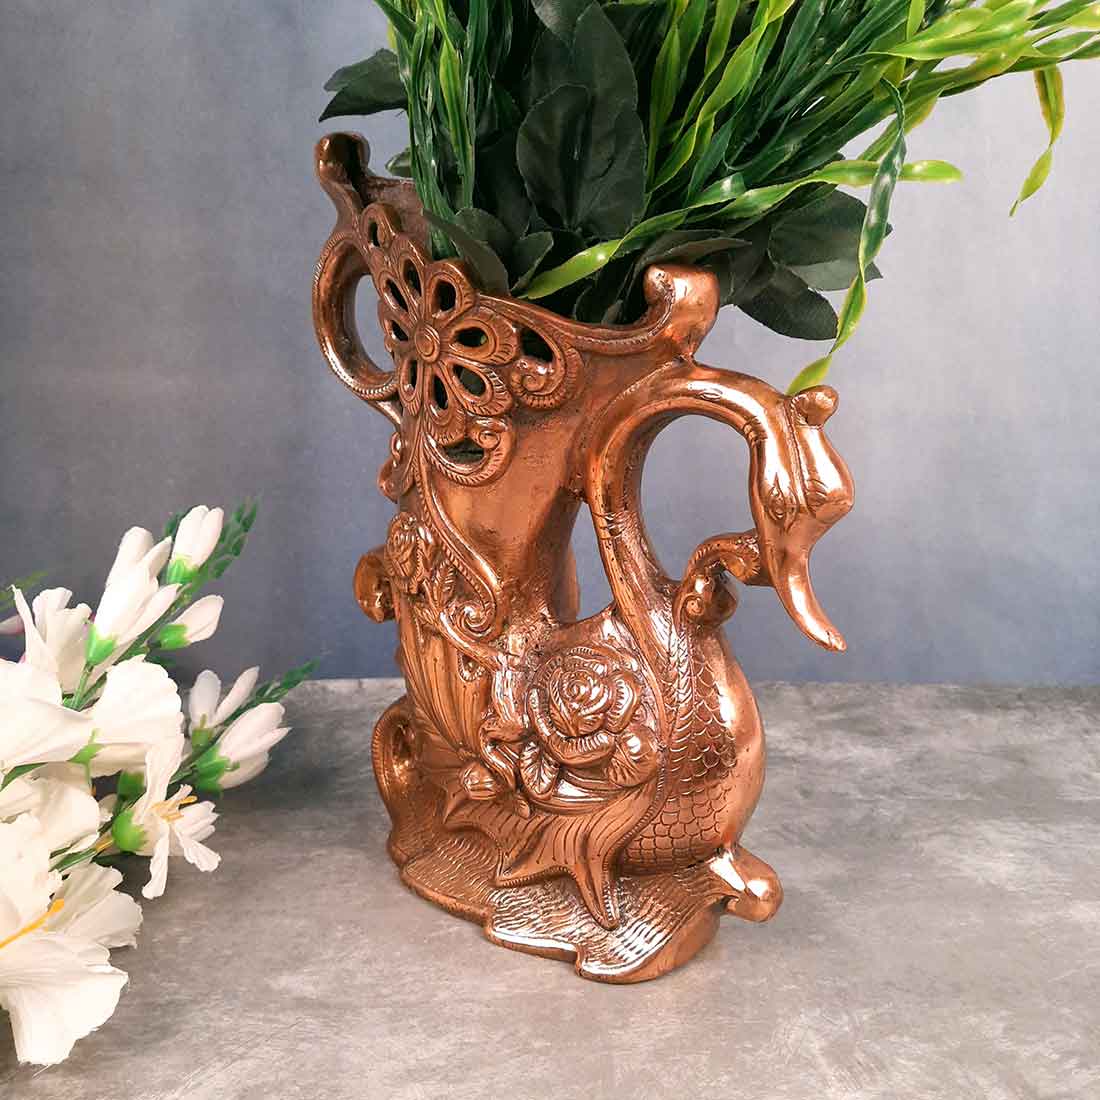 Vase | Flower Pot -  Metal | Showpiece Cum Vase - for Home Decoration, Living Room, Table, Shelf, Office , Interior Decor | Gifts for All Occasions - 14 Inch